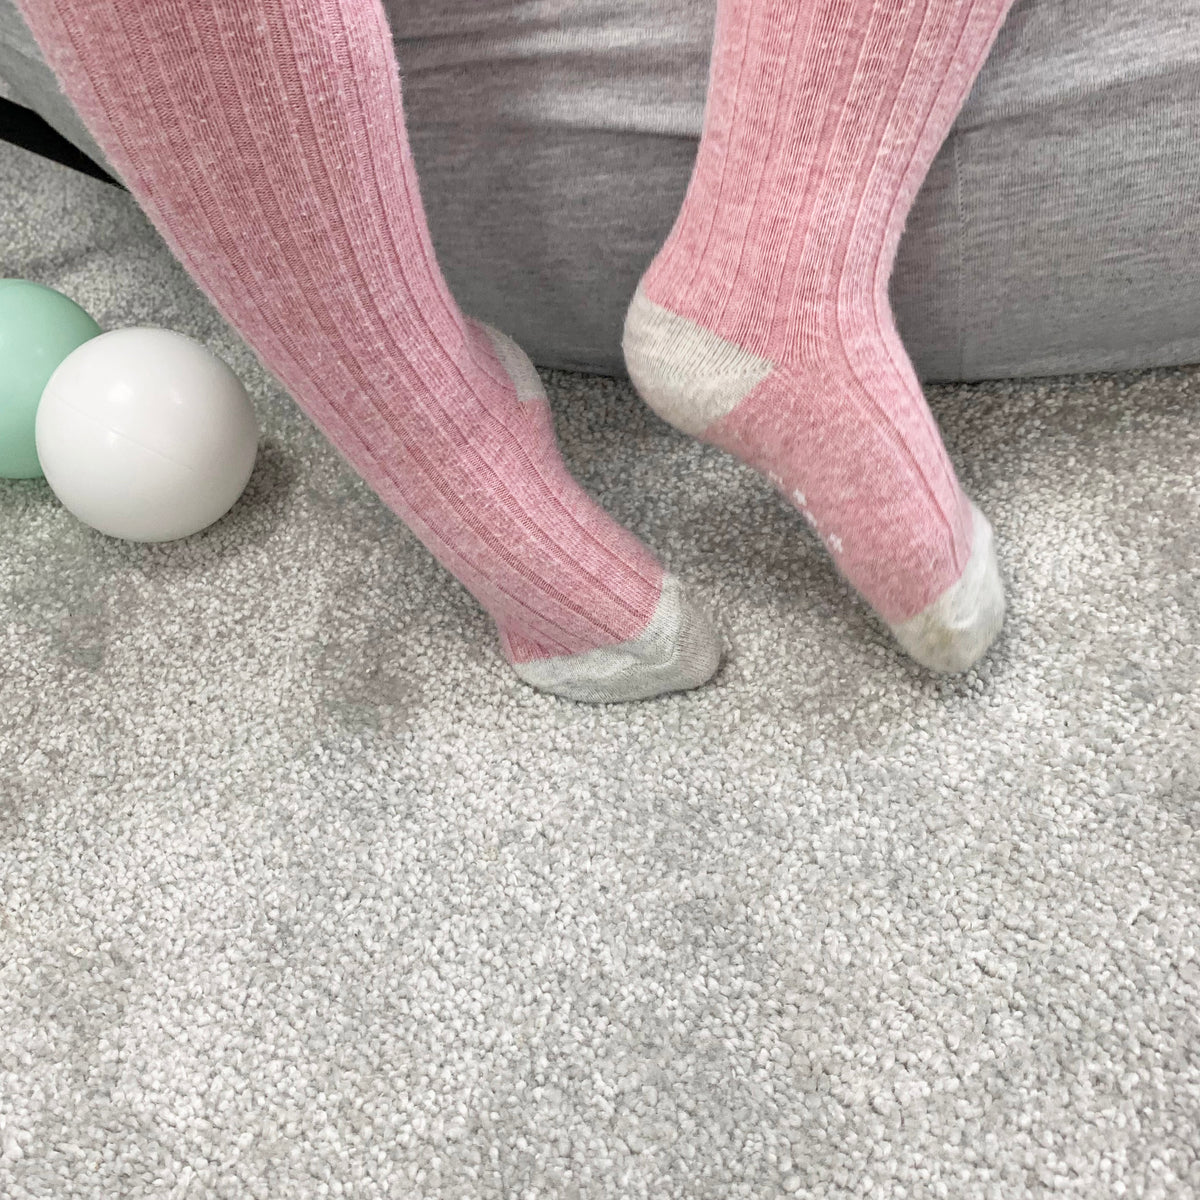 Non Slip Super Soft Ribbed Dusty Pink Baby And Toddler Tights